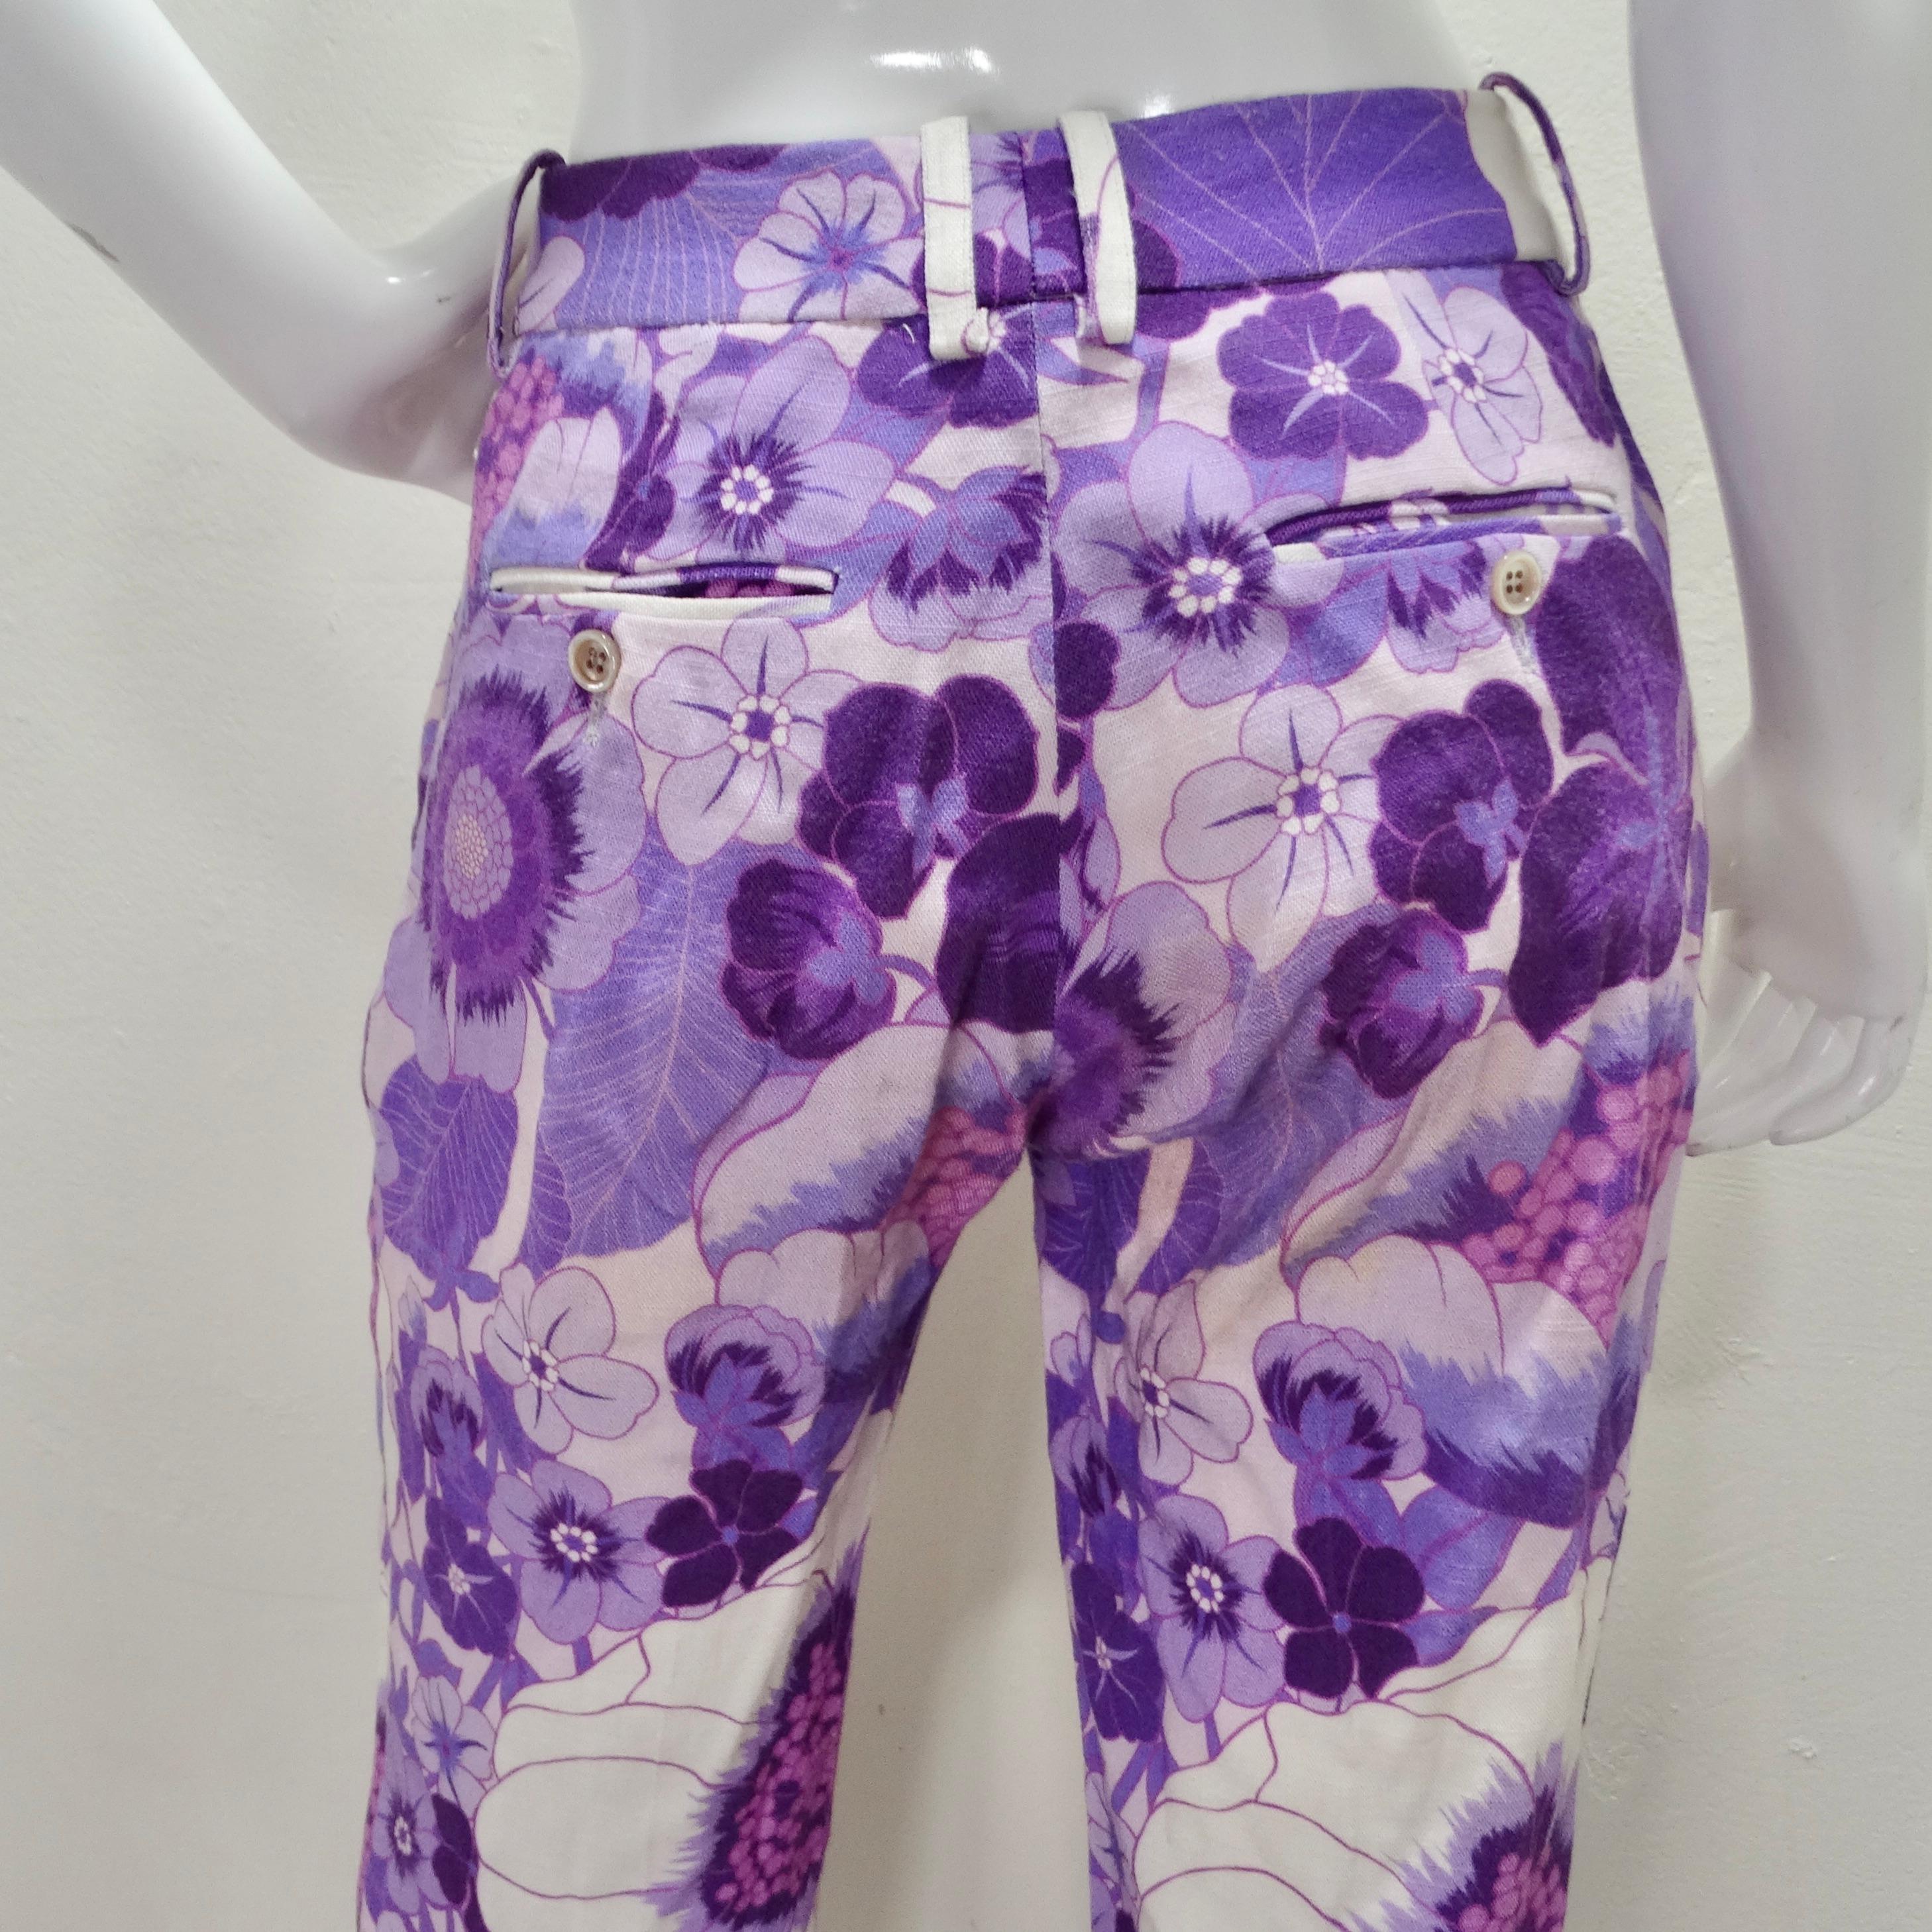 Tom Ford Spring 2021 Purple Floral Print Trousers For Sale 1